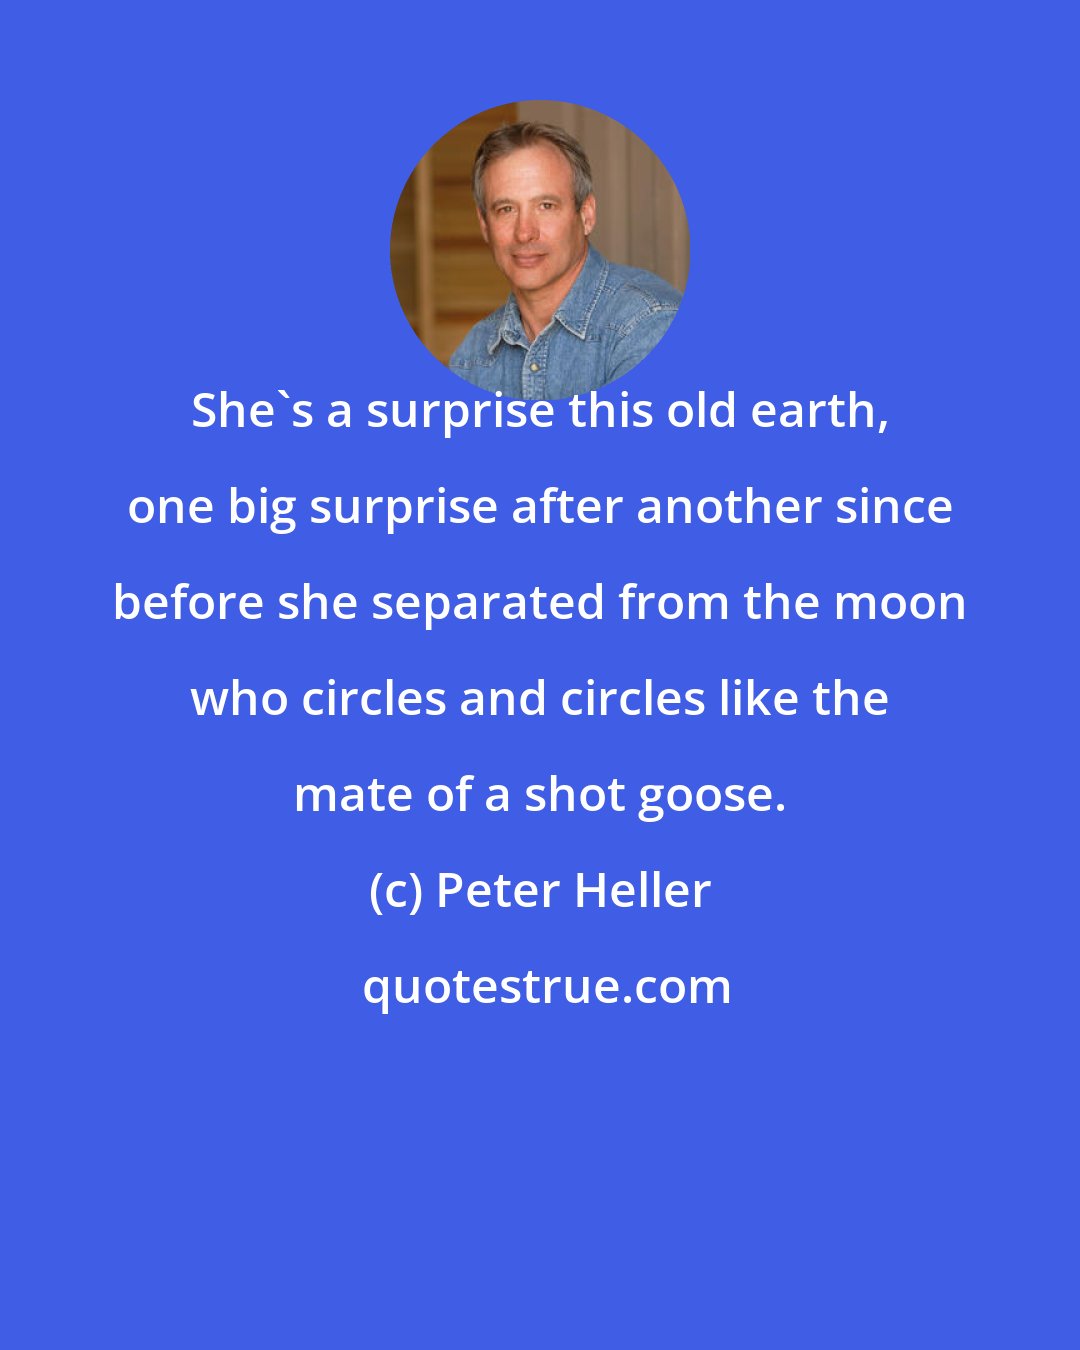 Peter Heller: She's a surprise this old earth, one big surprise after another since before she separated from the moon who circles and circles like the mate of a shot goose.